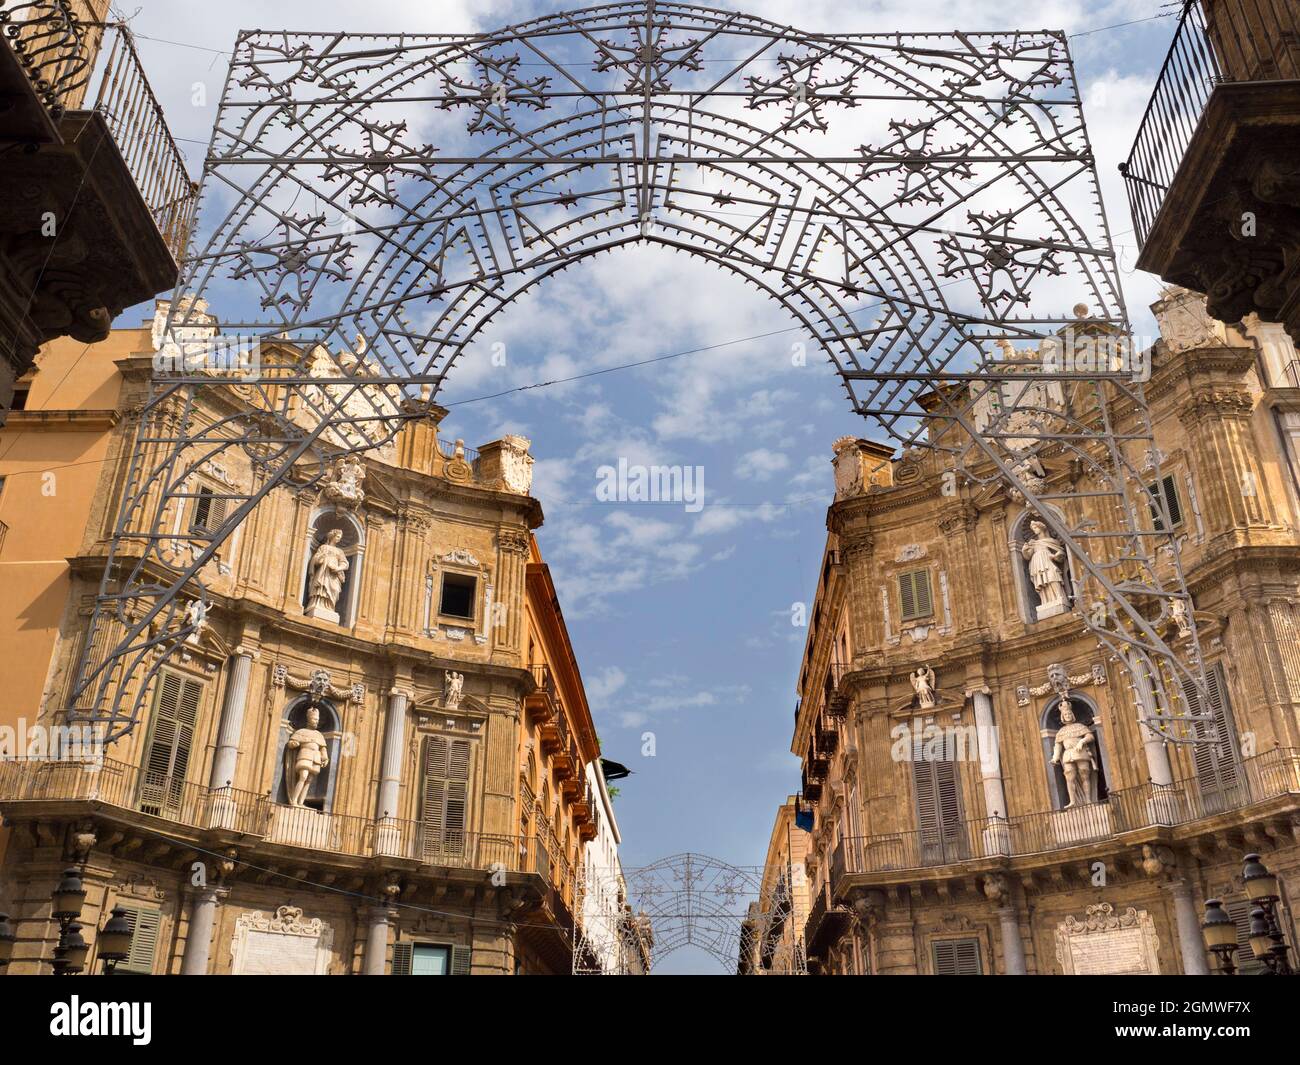 Palermo, Sicily, Italy - 23 September 2019 Piazza Vigliena is a grandiose Baroque square in Palermo, Sicily, It was built from around1608-1620  at the Stock Photo